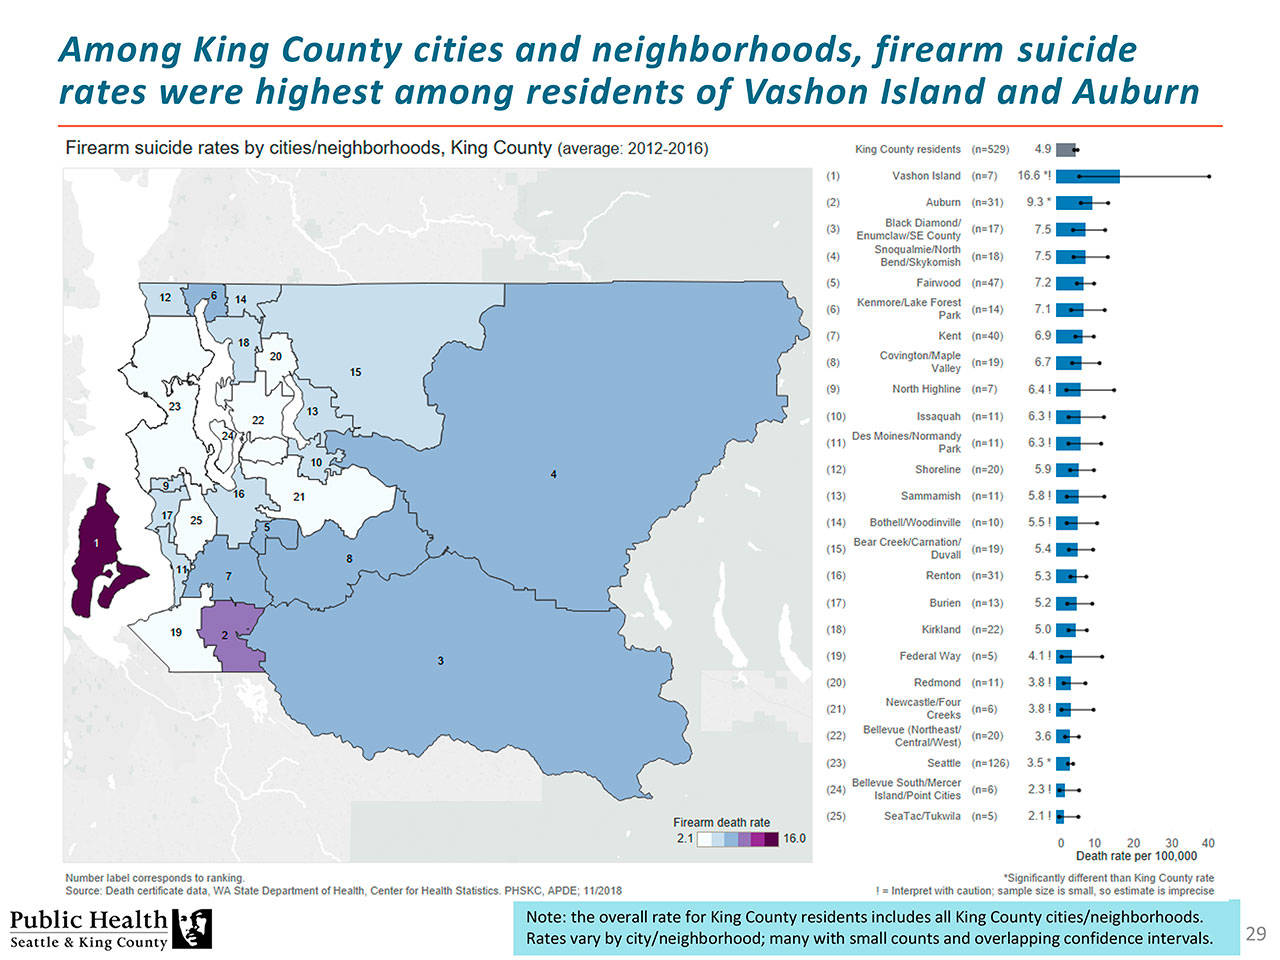 A page from King County Public Health department’s report about firearm violence and suicide in the county. Image courtesy Public Health - Seattle and King County.